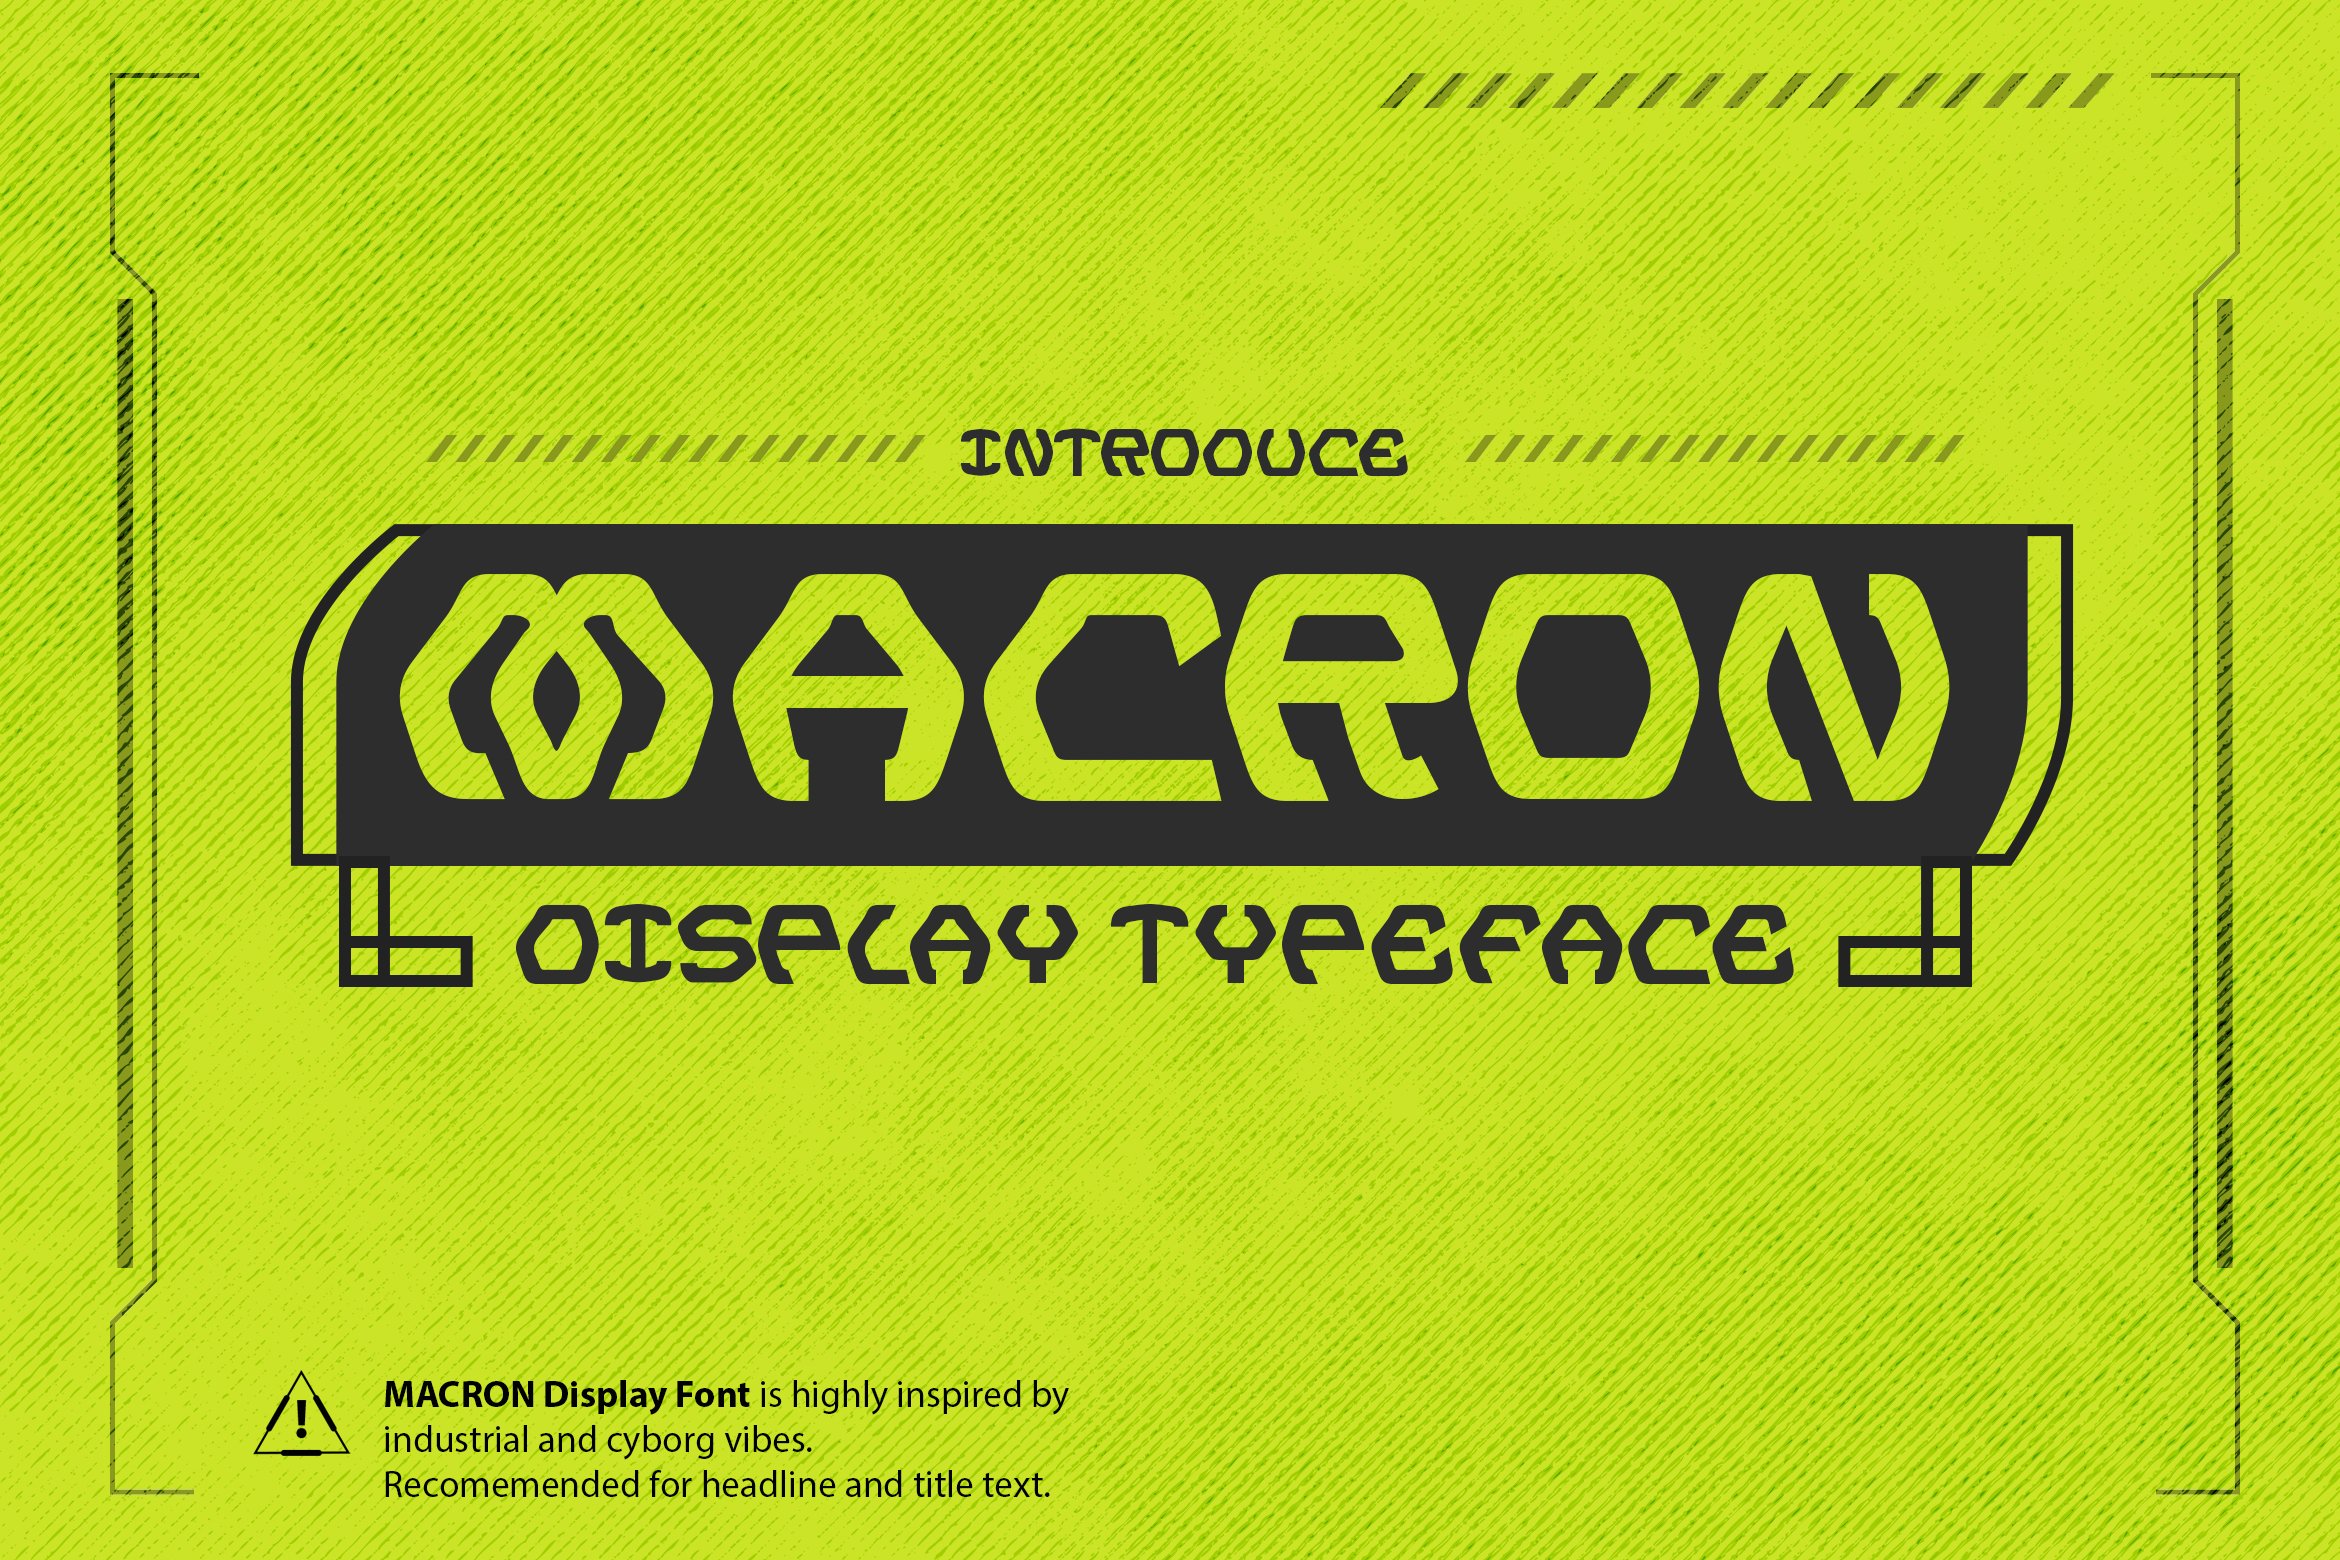 Macron - Display Typeface cover image.